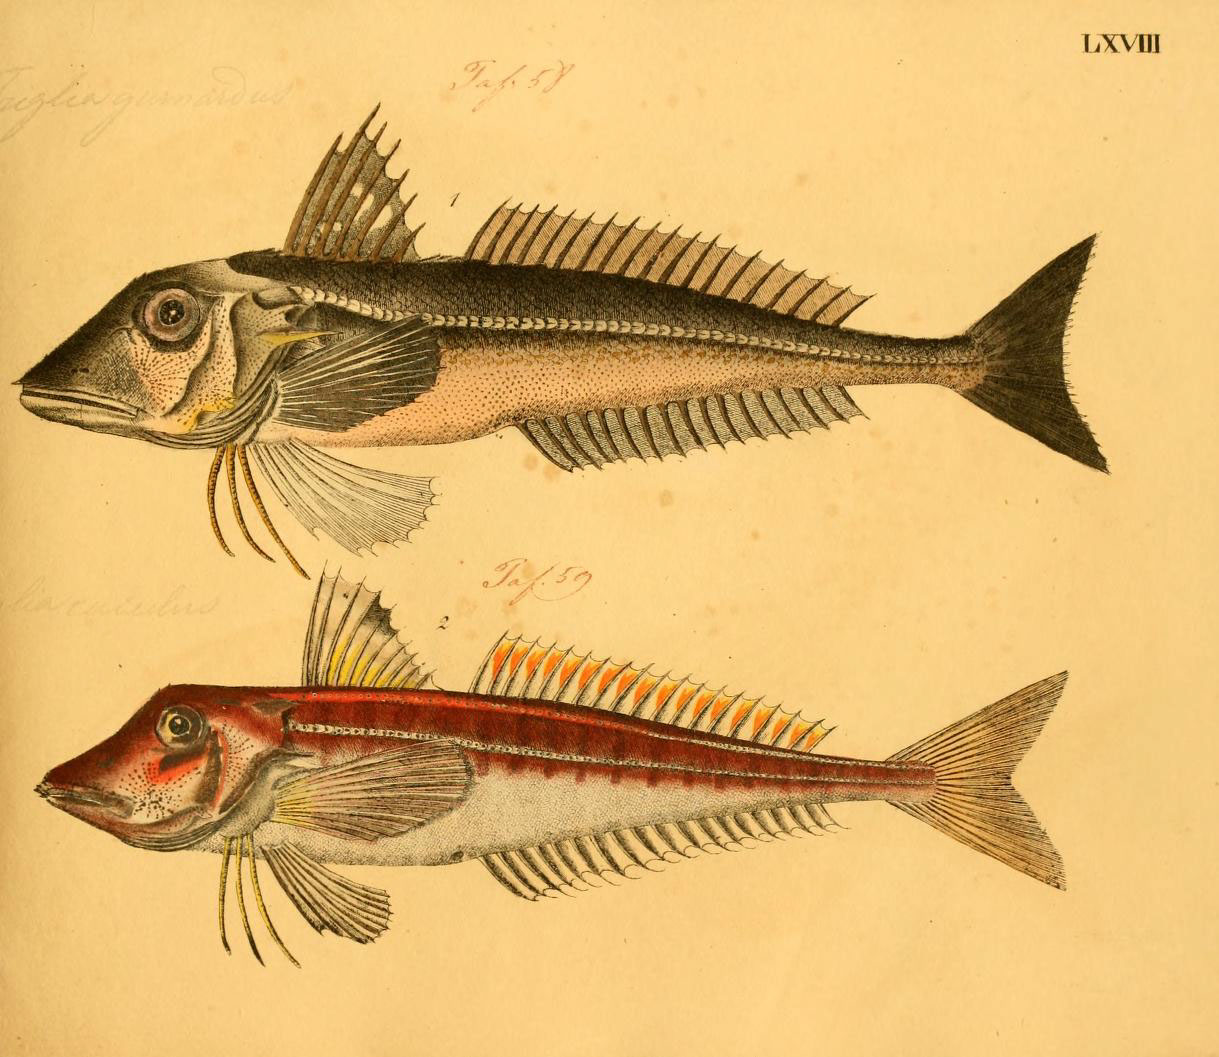 an old illustration of fish with long antennae